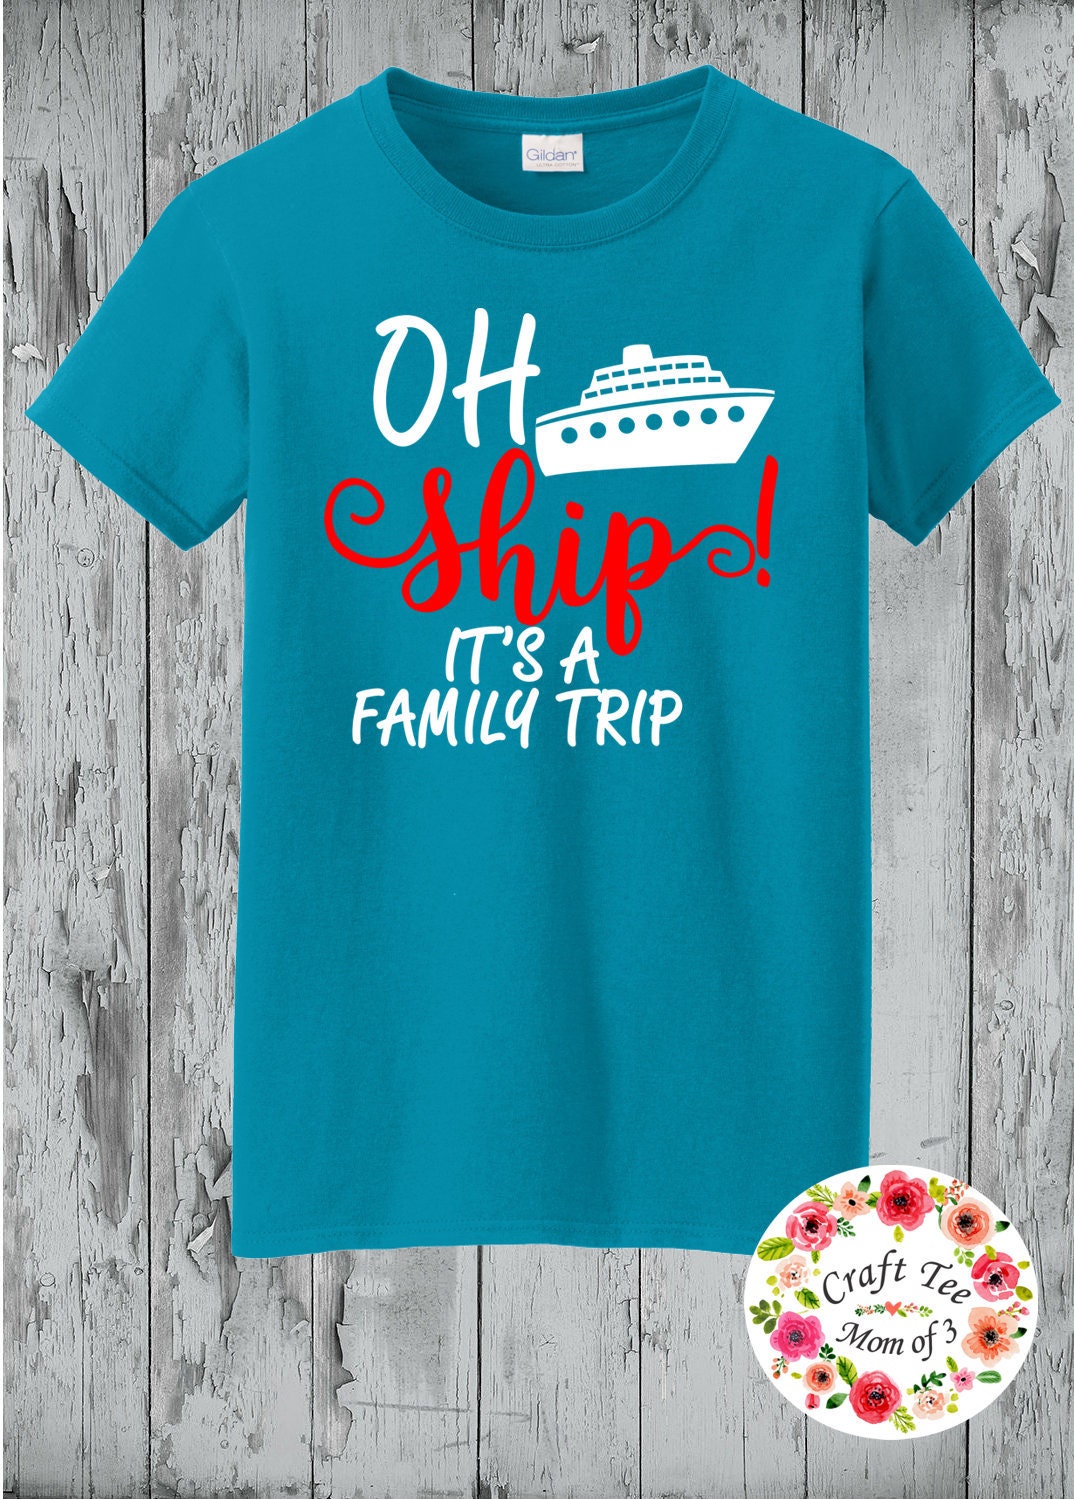 cruise t shirts for family